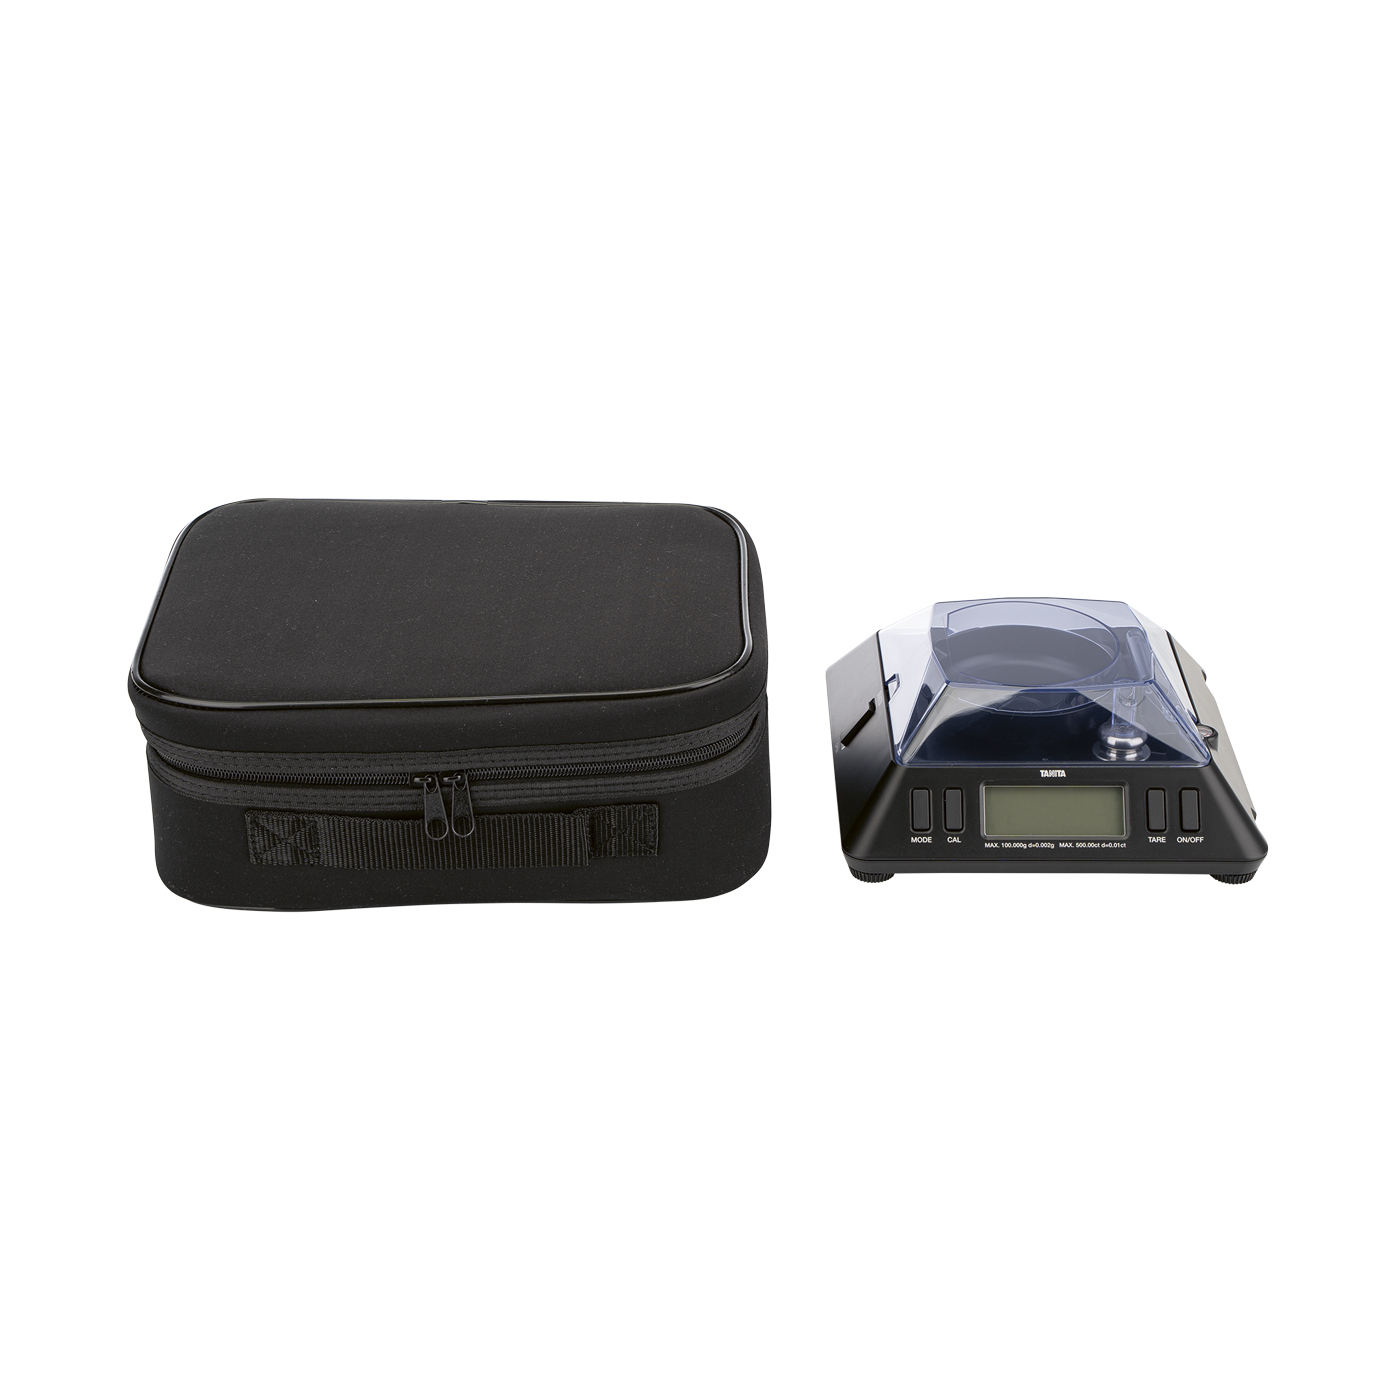 KP601 Carat Scale, with two displays - 1 piece